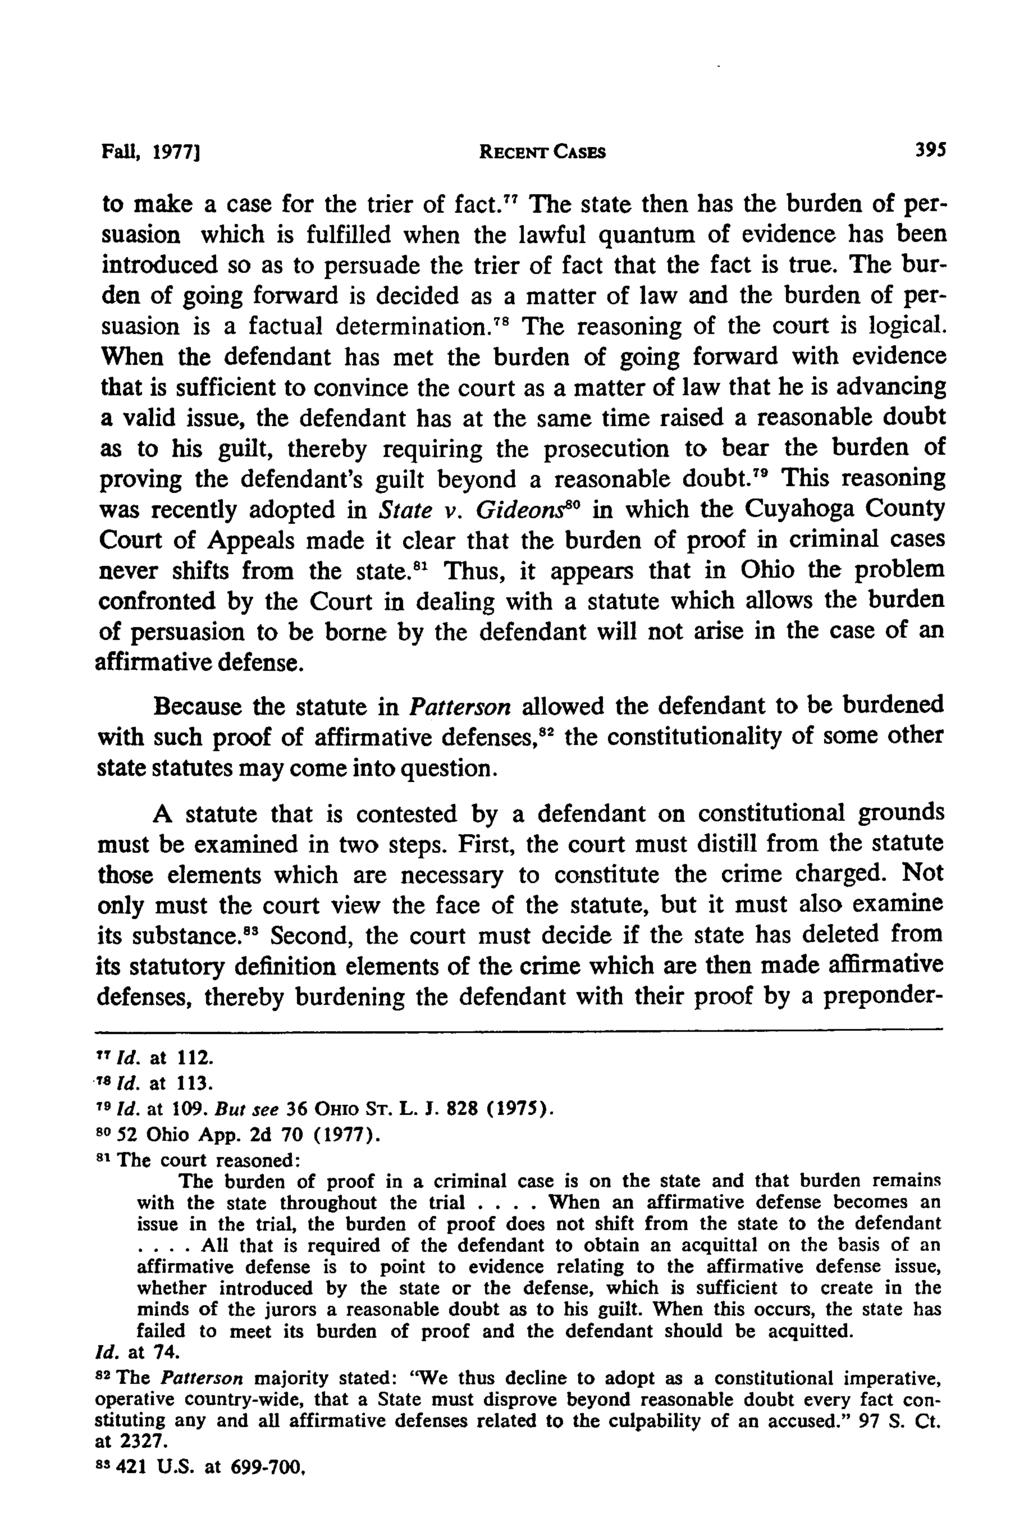 Akron Law Review, Vol. 11 [1978], Iss. 2, Art. 9 Fall, 1977] RECENTr CASES to make a case for the trier of fact.